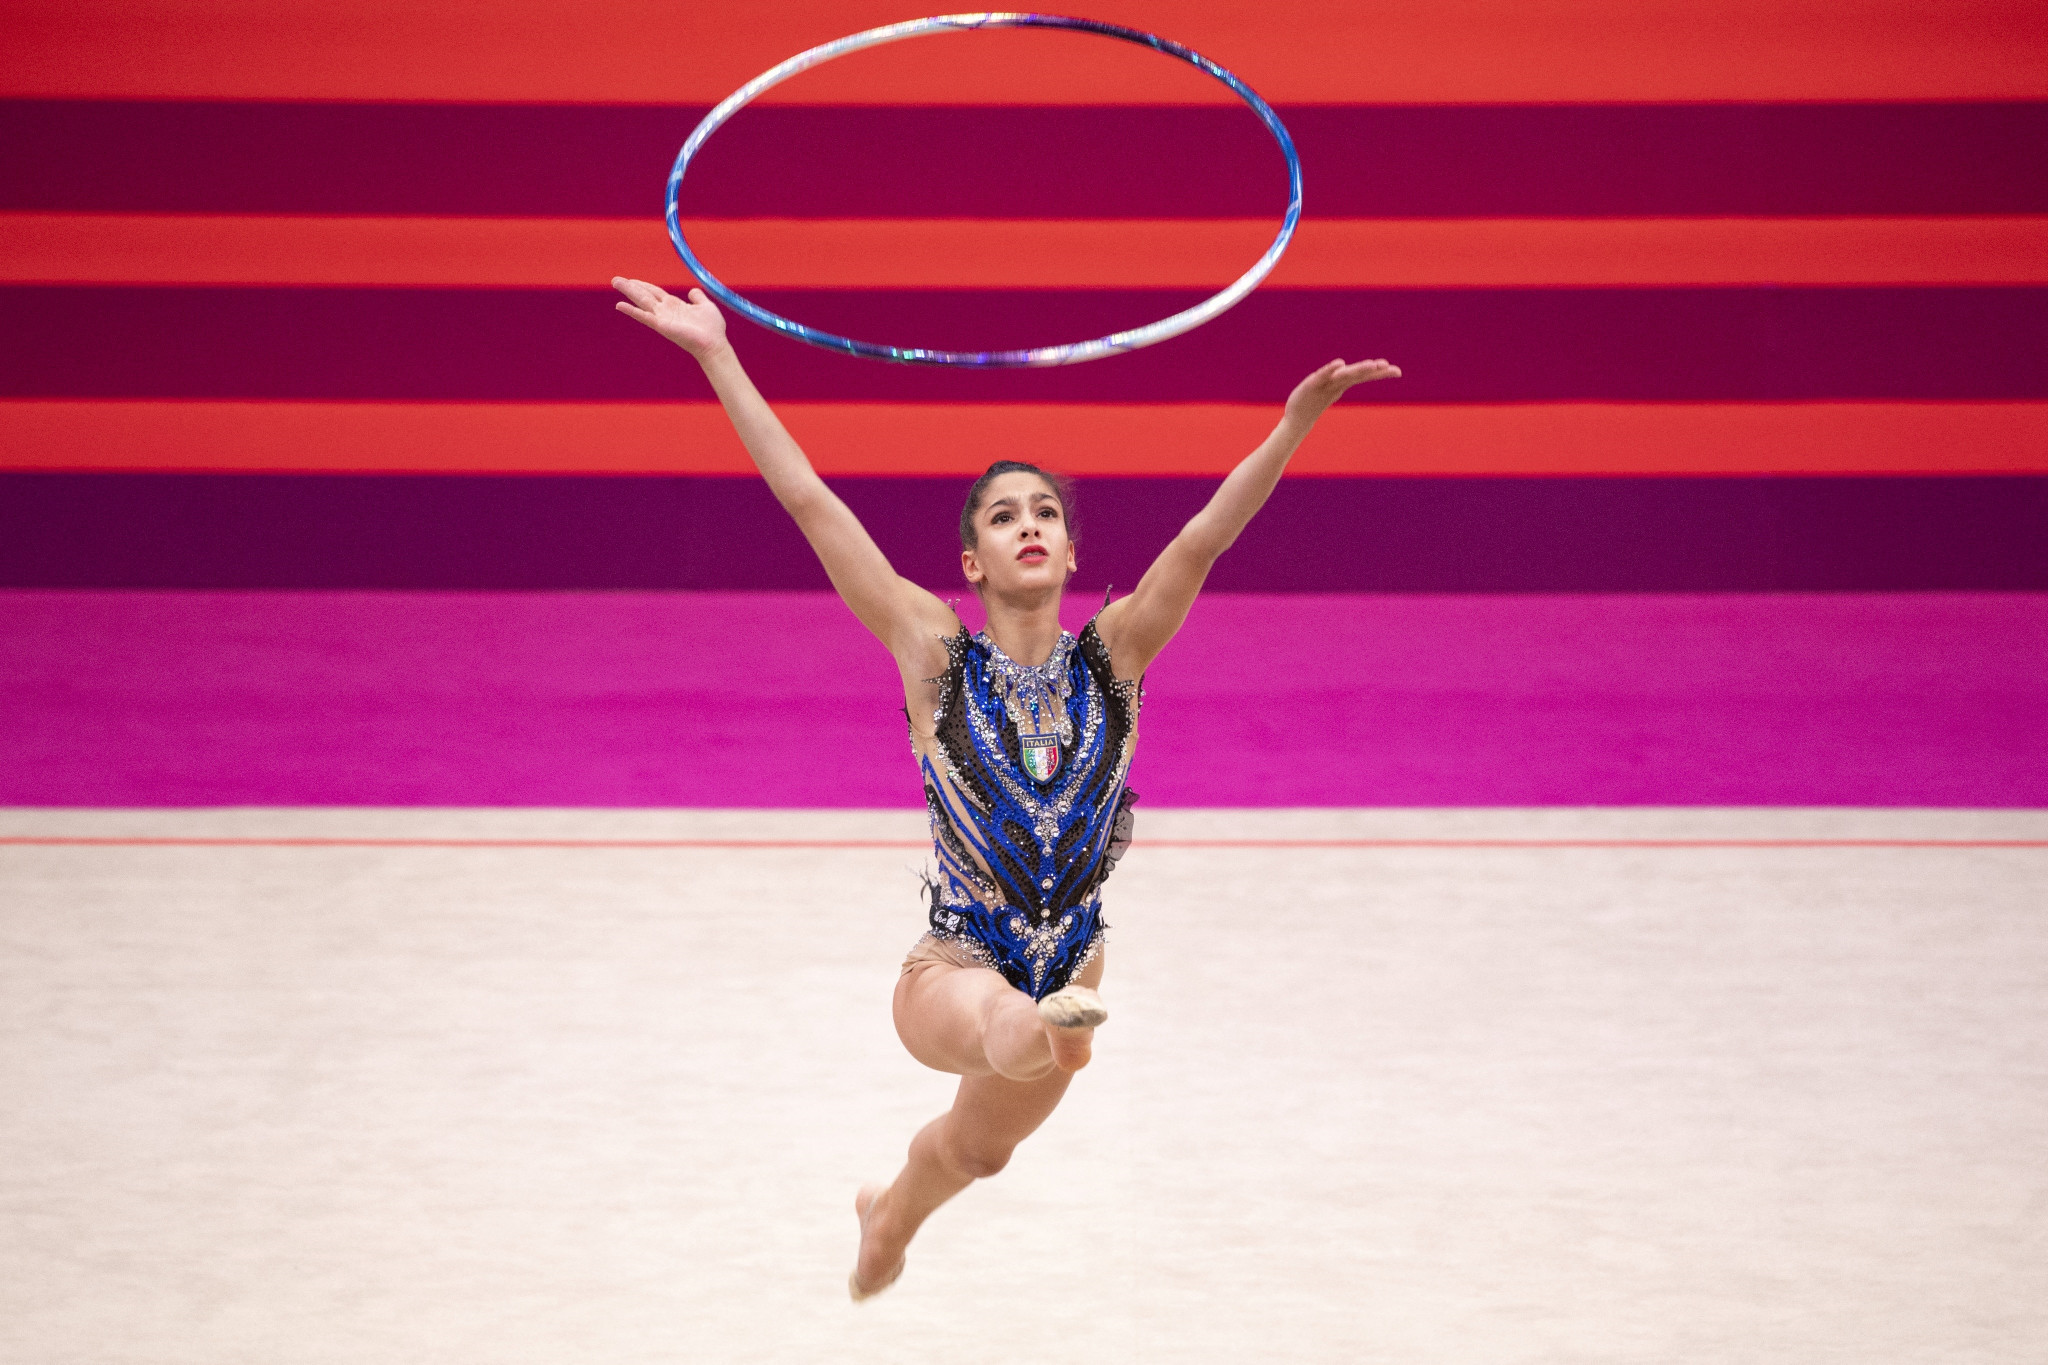 Sofia Raffaeli backed up her all-around gold by winning the hoop title in Baku ©Getty Images